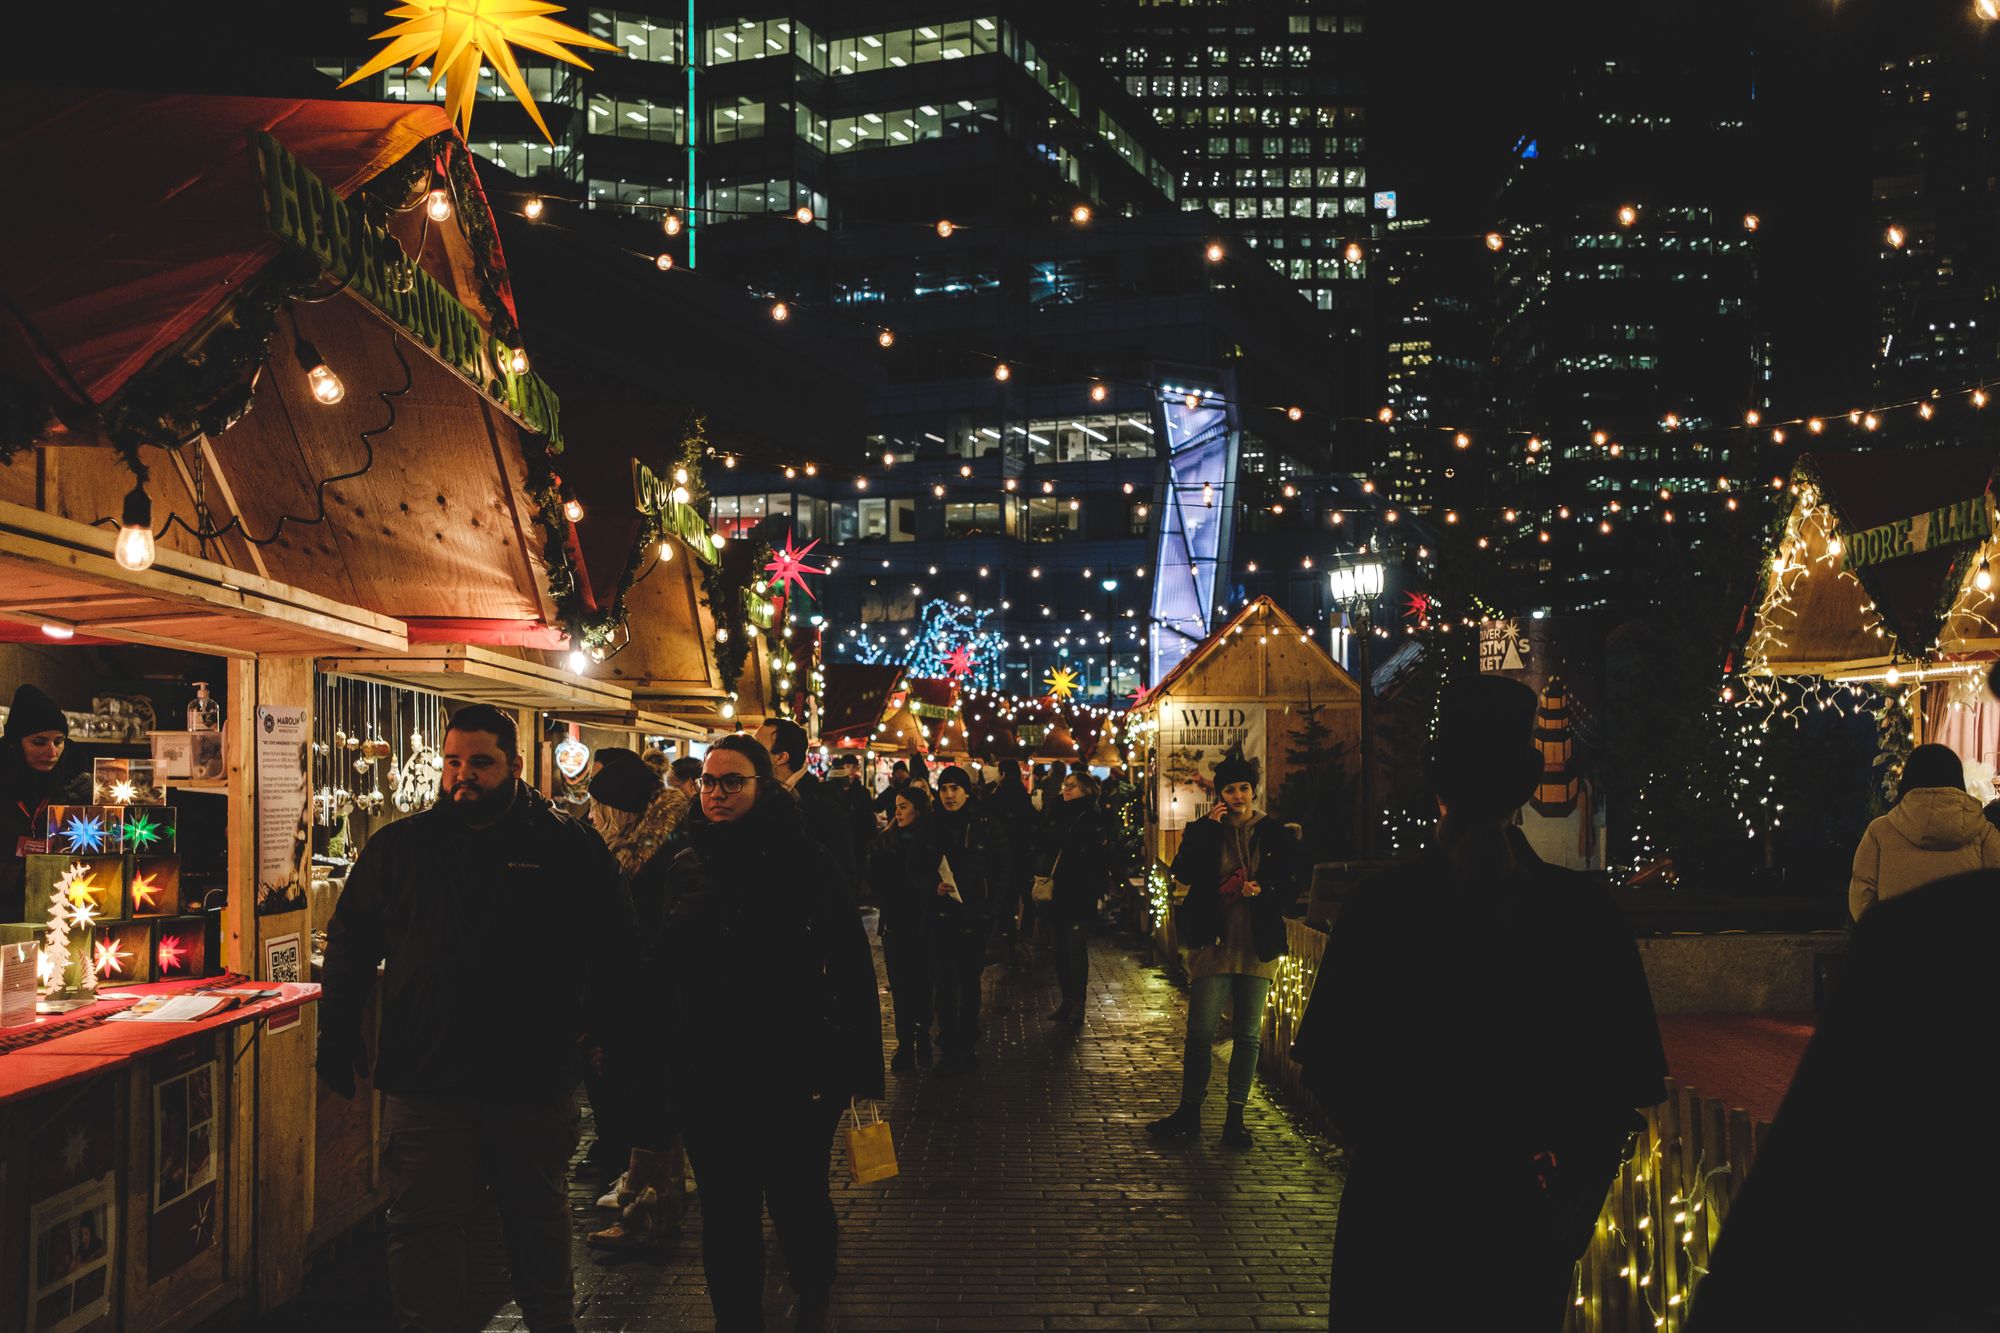 Inside the Vancouver Christmas Market